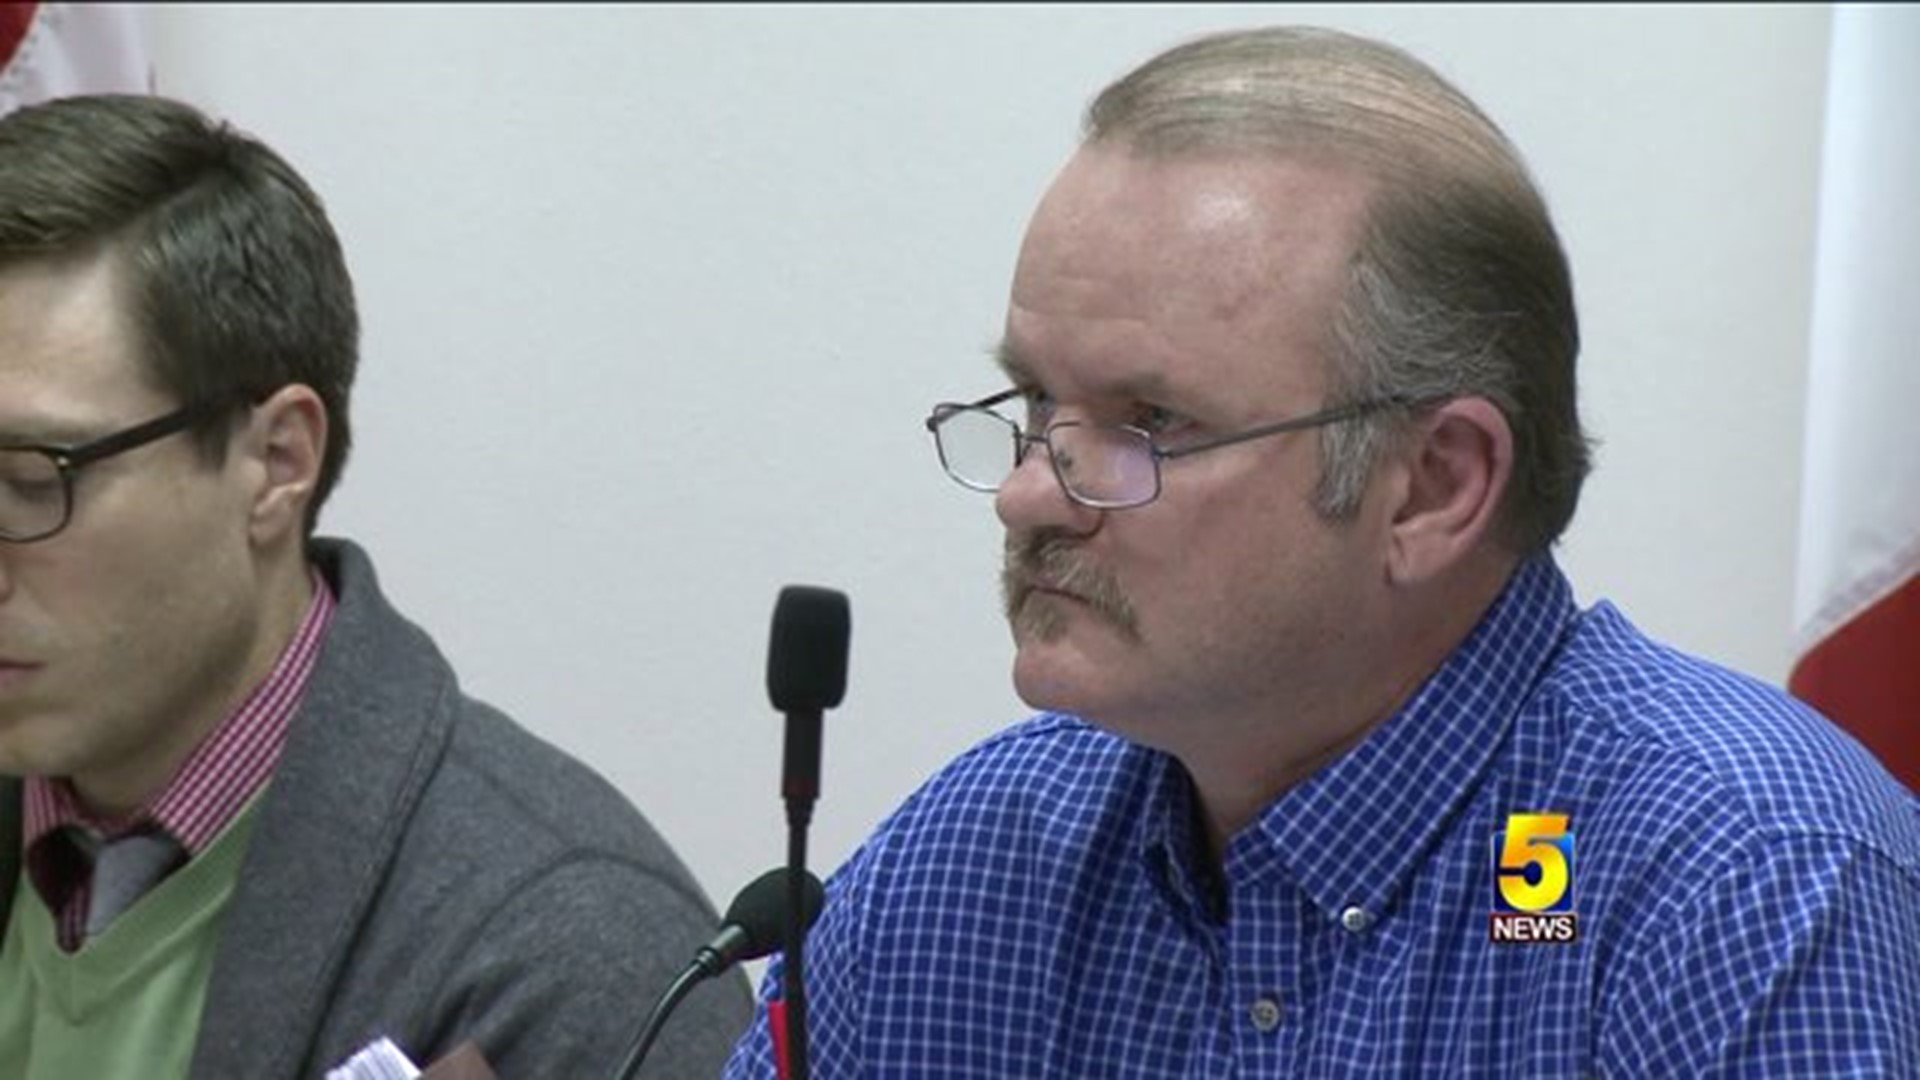 Tontitown Mayor Discusses Firing Of Police Chief